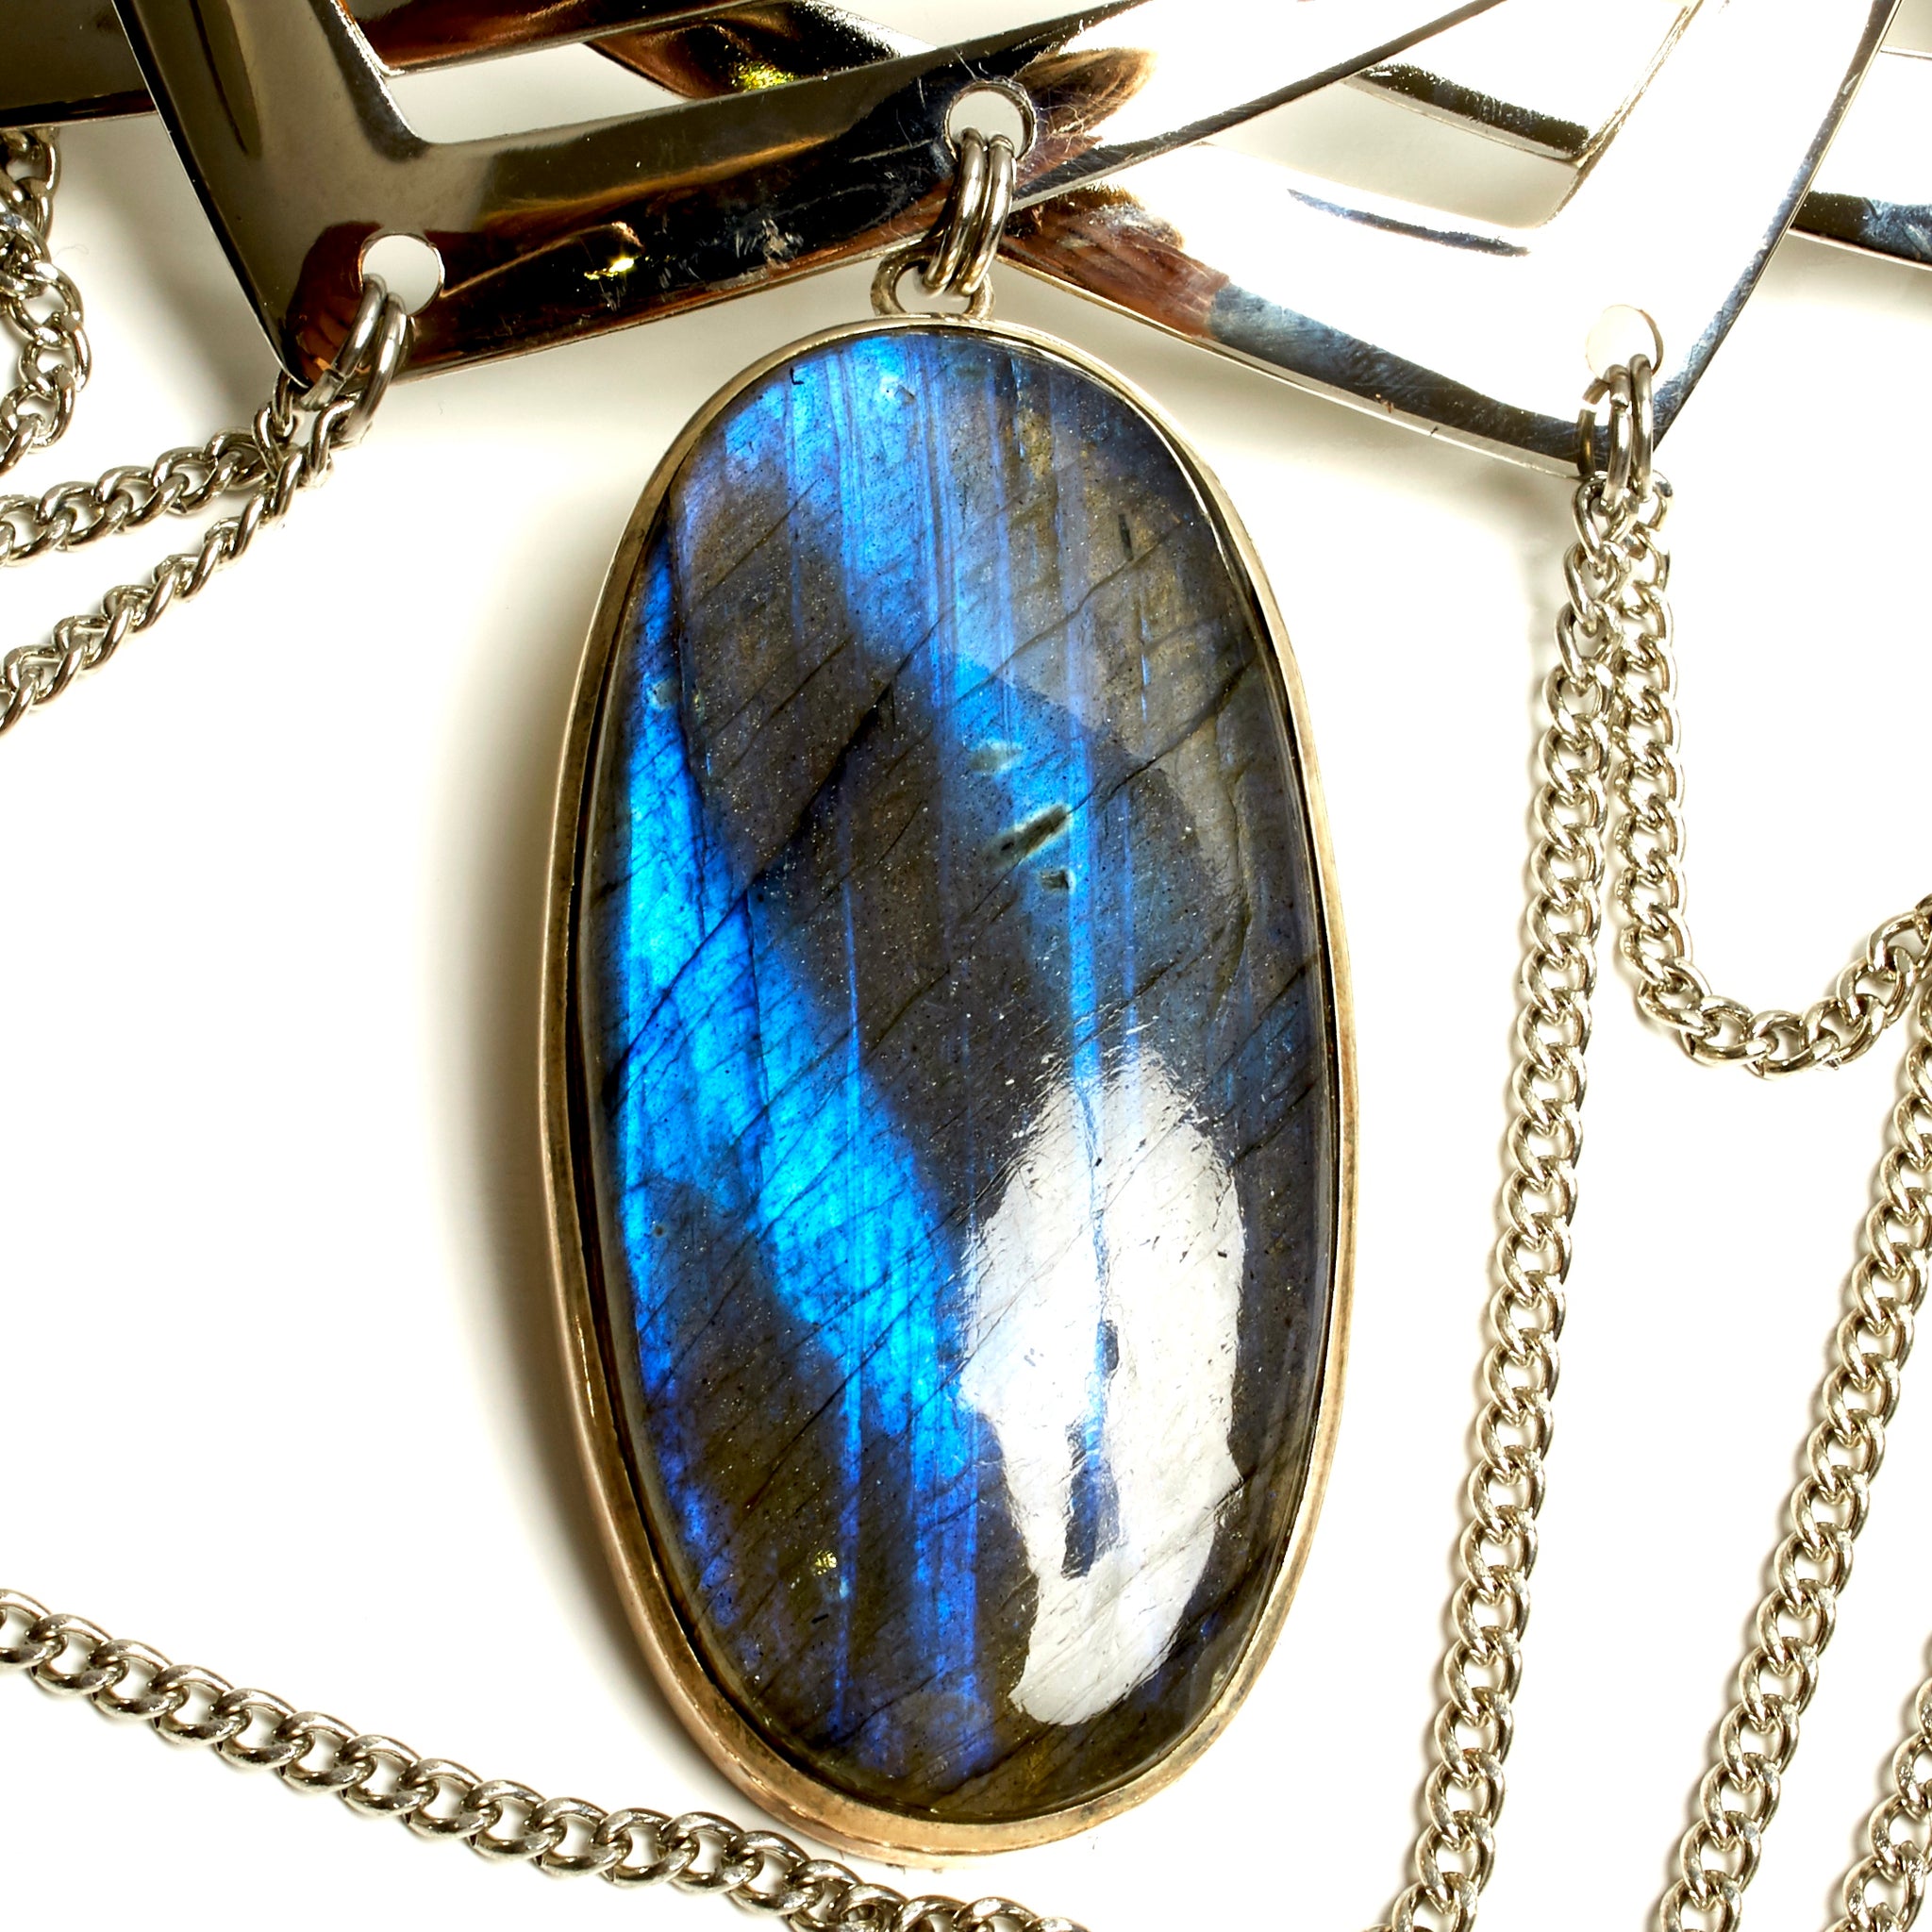 INTRICATE TORQUE NECKLACE WITH CHAINS AND LARGE LABRADORITE STONE PENDENT. by nyet jewelry.